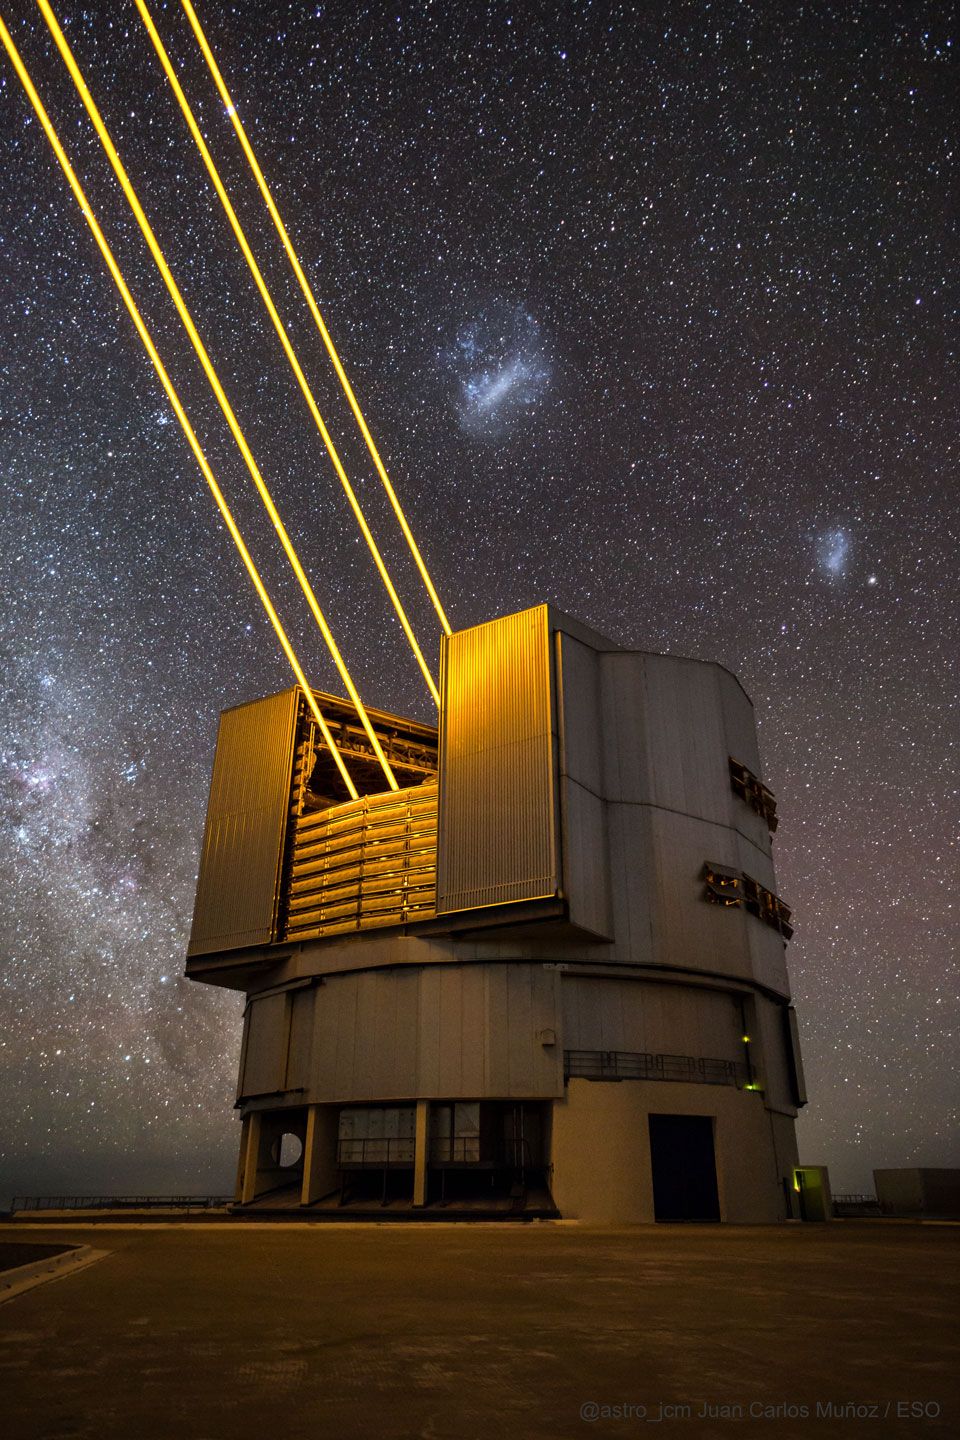 Firing Lasers to Tame the Sky (Astronomy Picture of the Day)